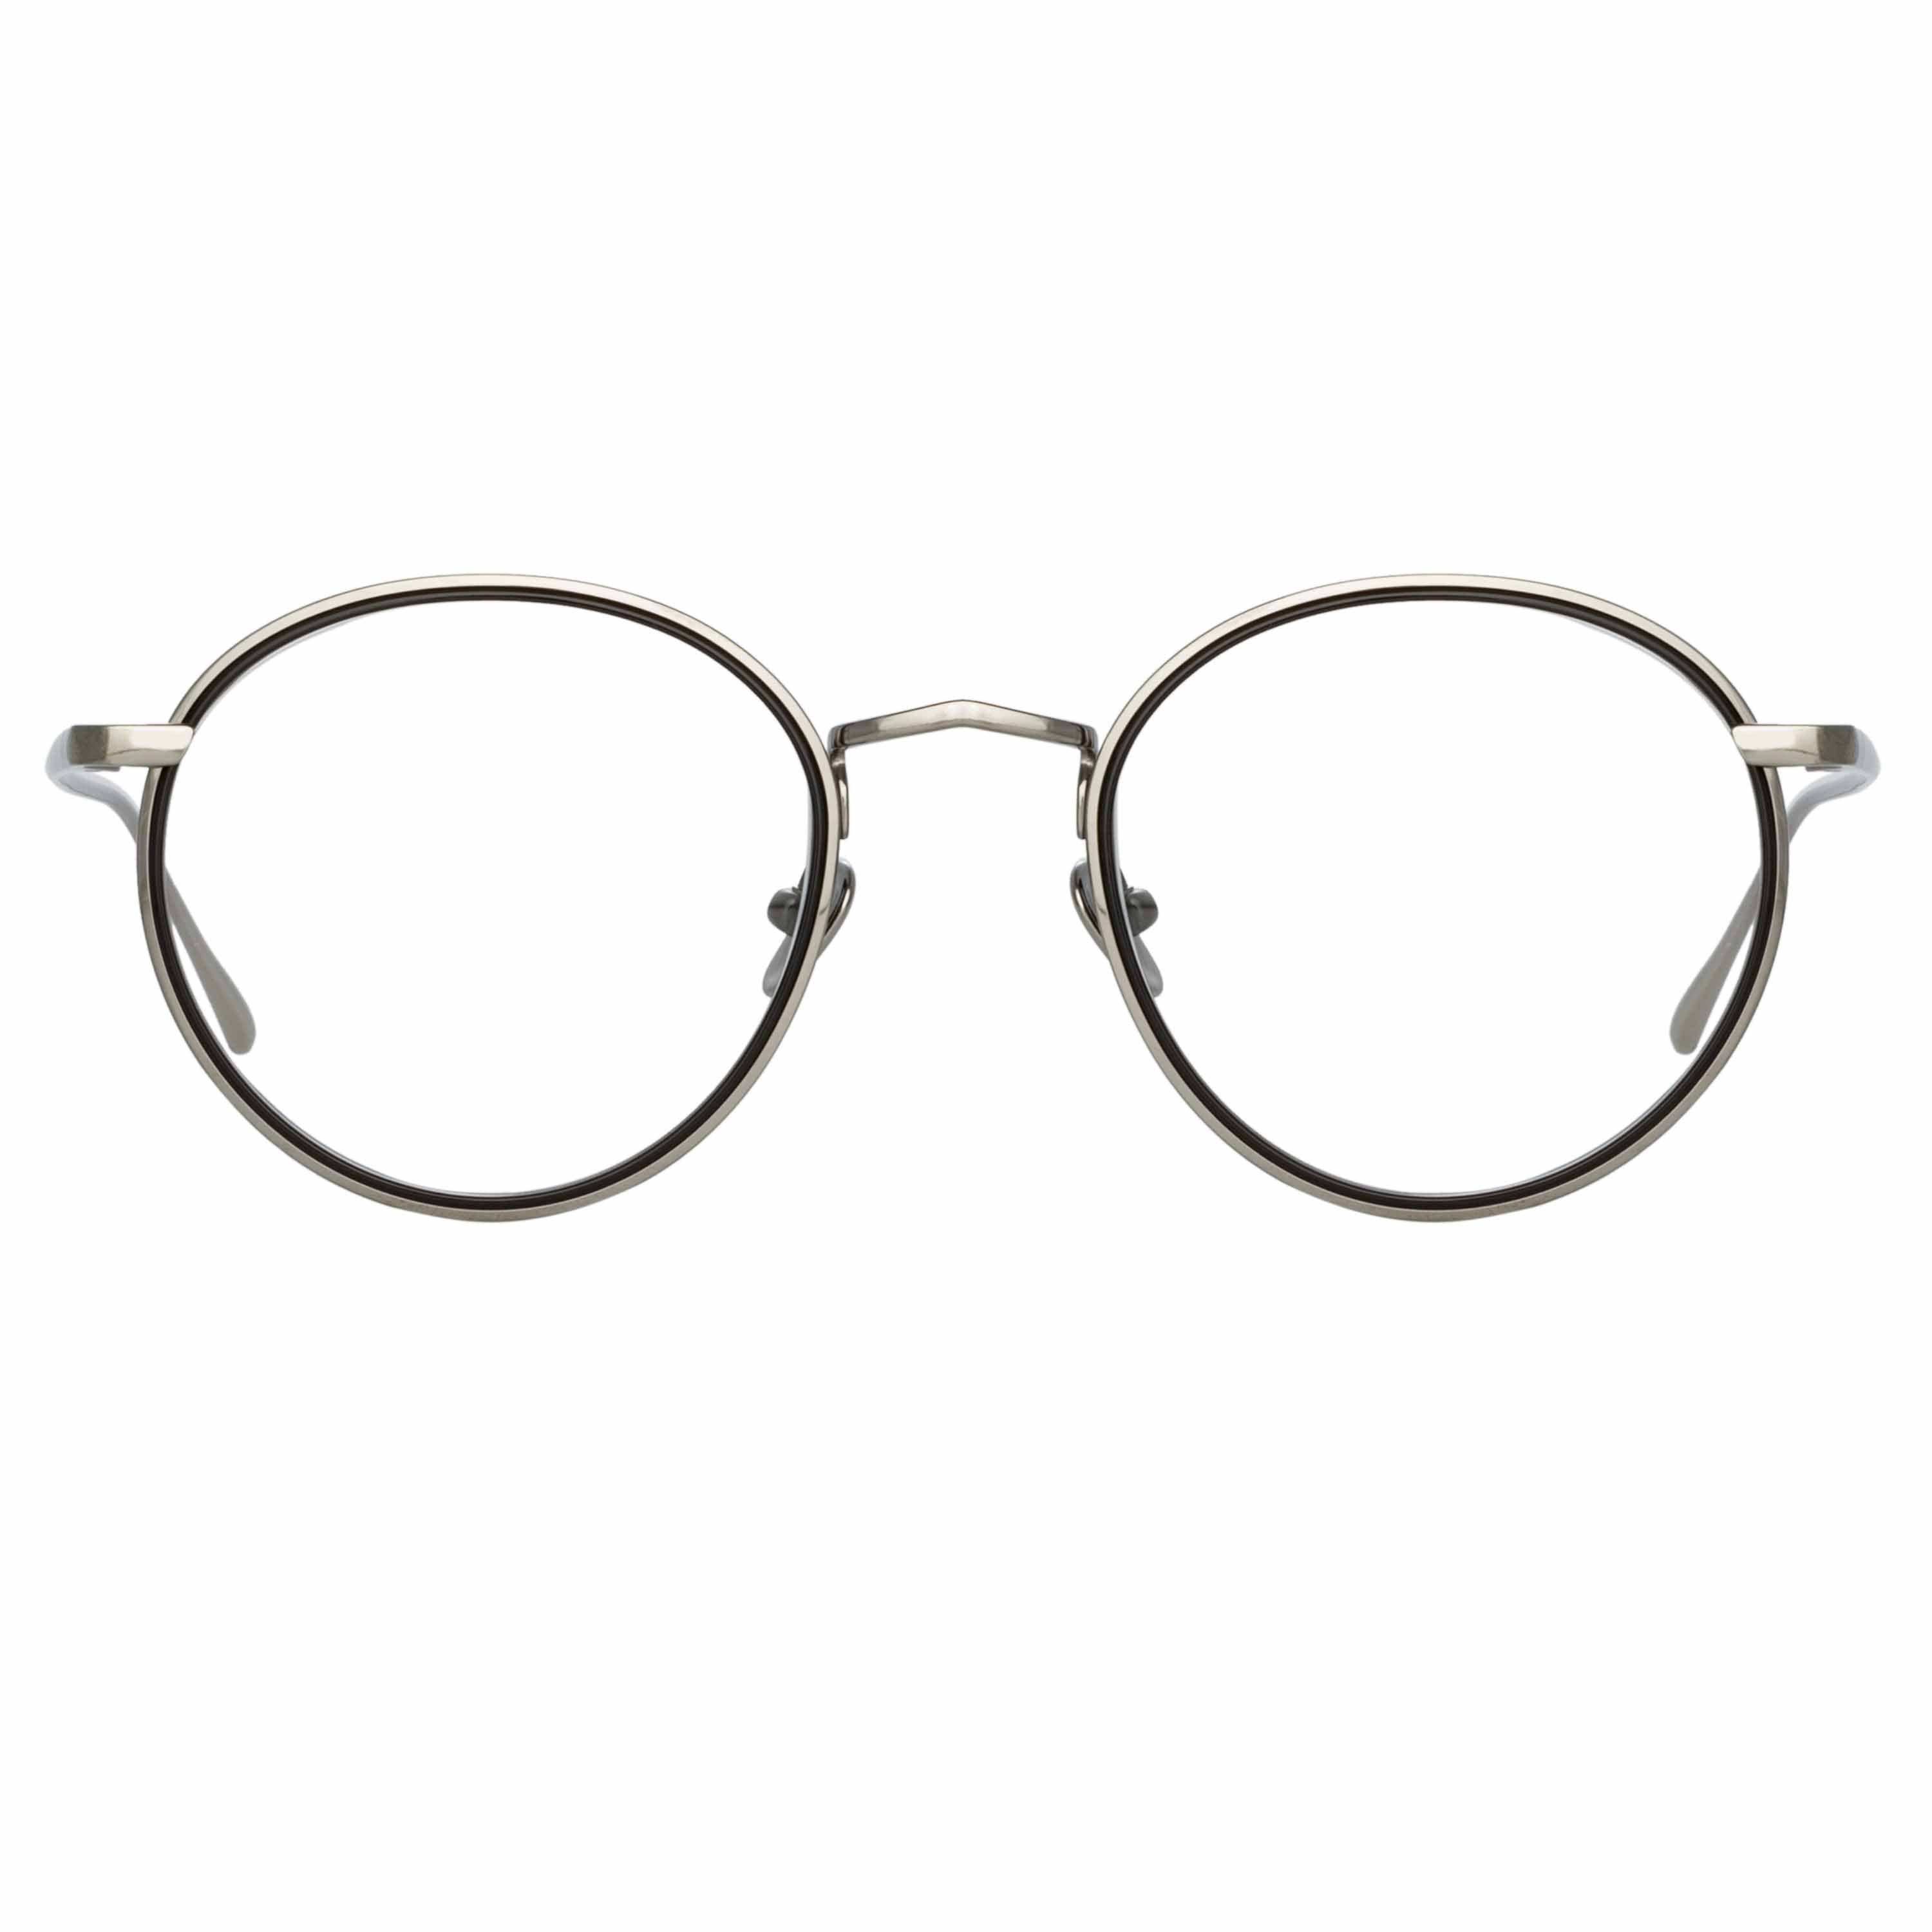 COMER OPTICAL OVAL FRAME IN WHITE GOLD - 1